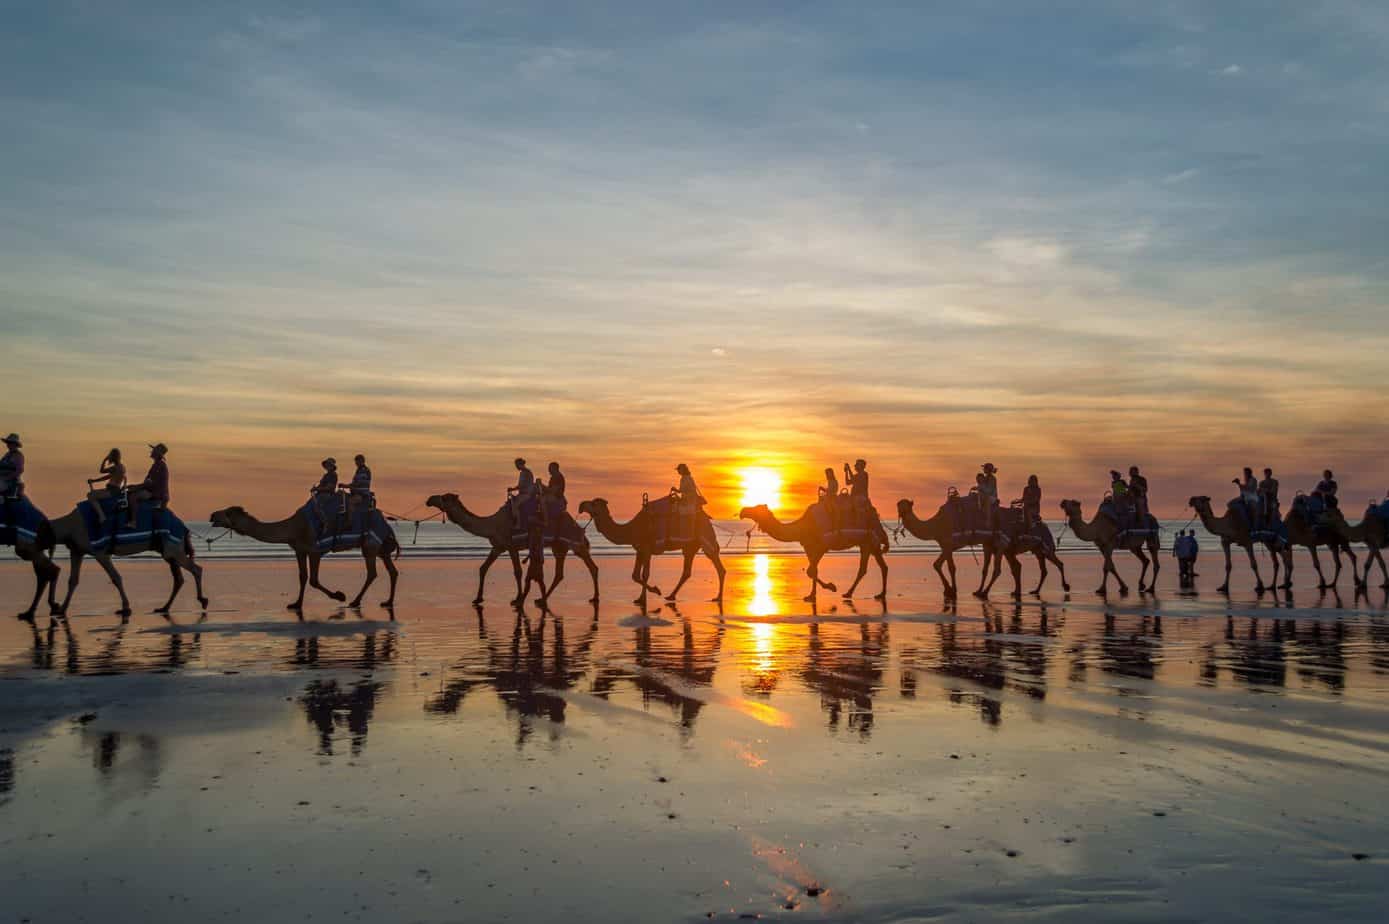 A group of people ride camels on the beach at sunset